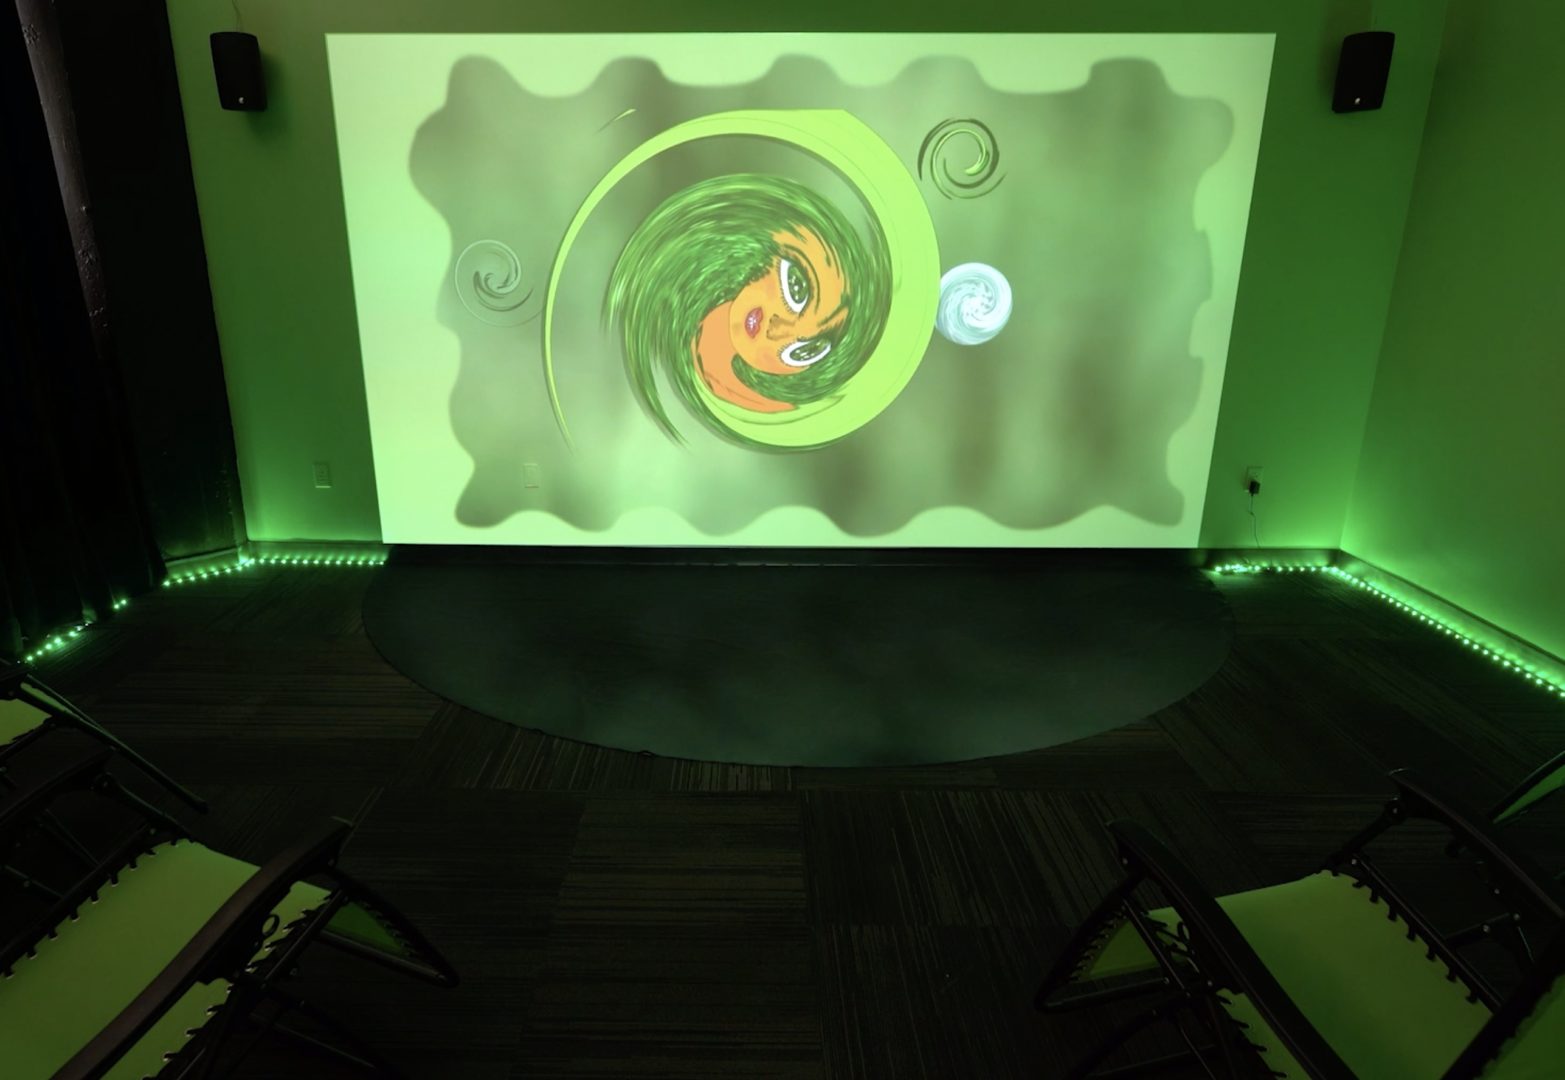 Documentation of hiba ali, oceans we carry: rough as silk. The video in the cyclone (rough as silk) is projected on a wall; a green wavelike video is projected on a canvas on the floor. There are two green chairs facing the wall.